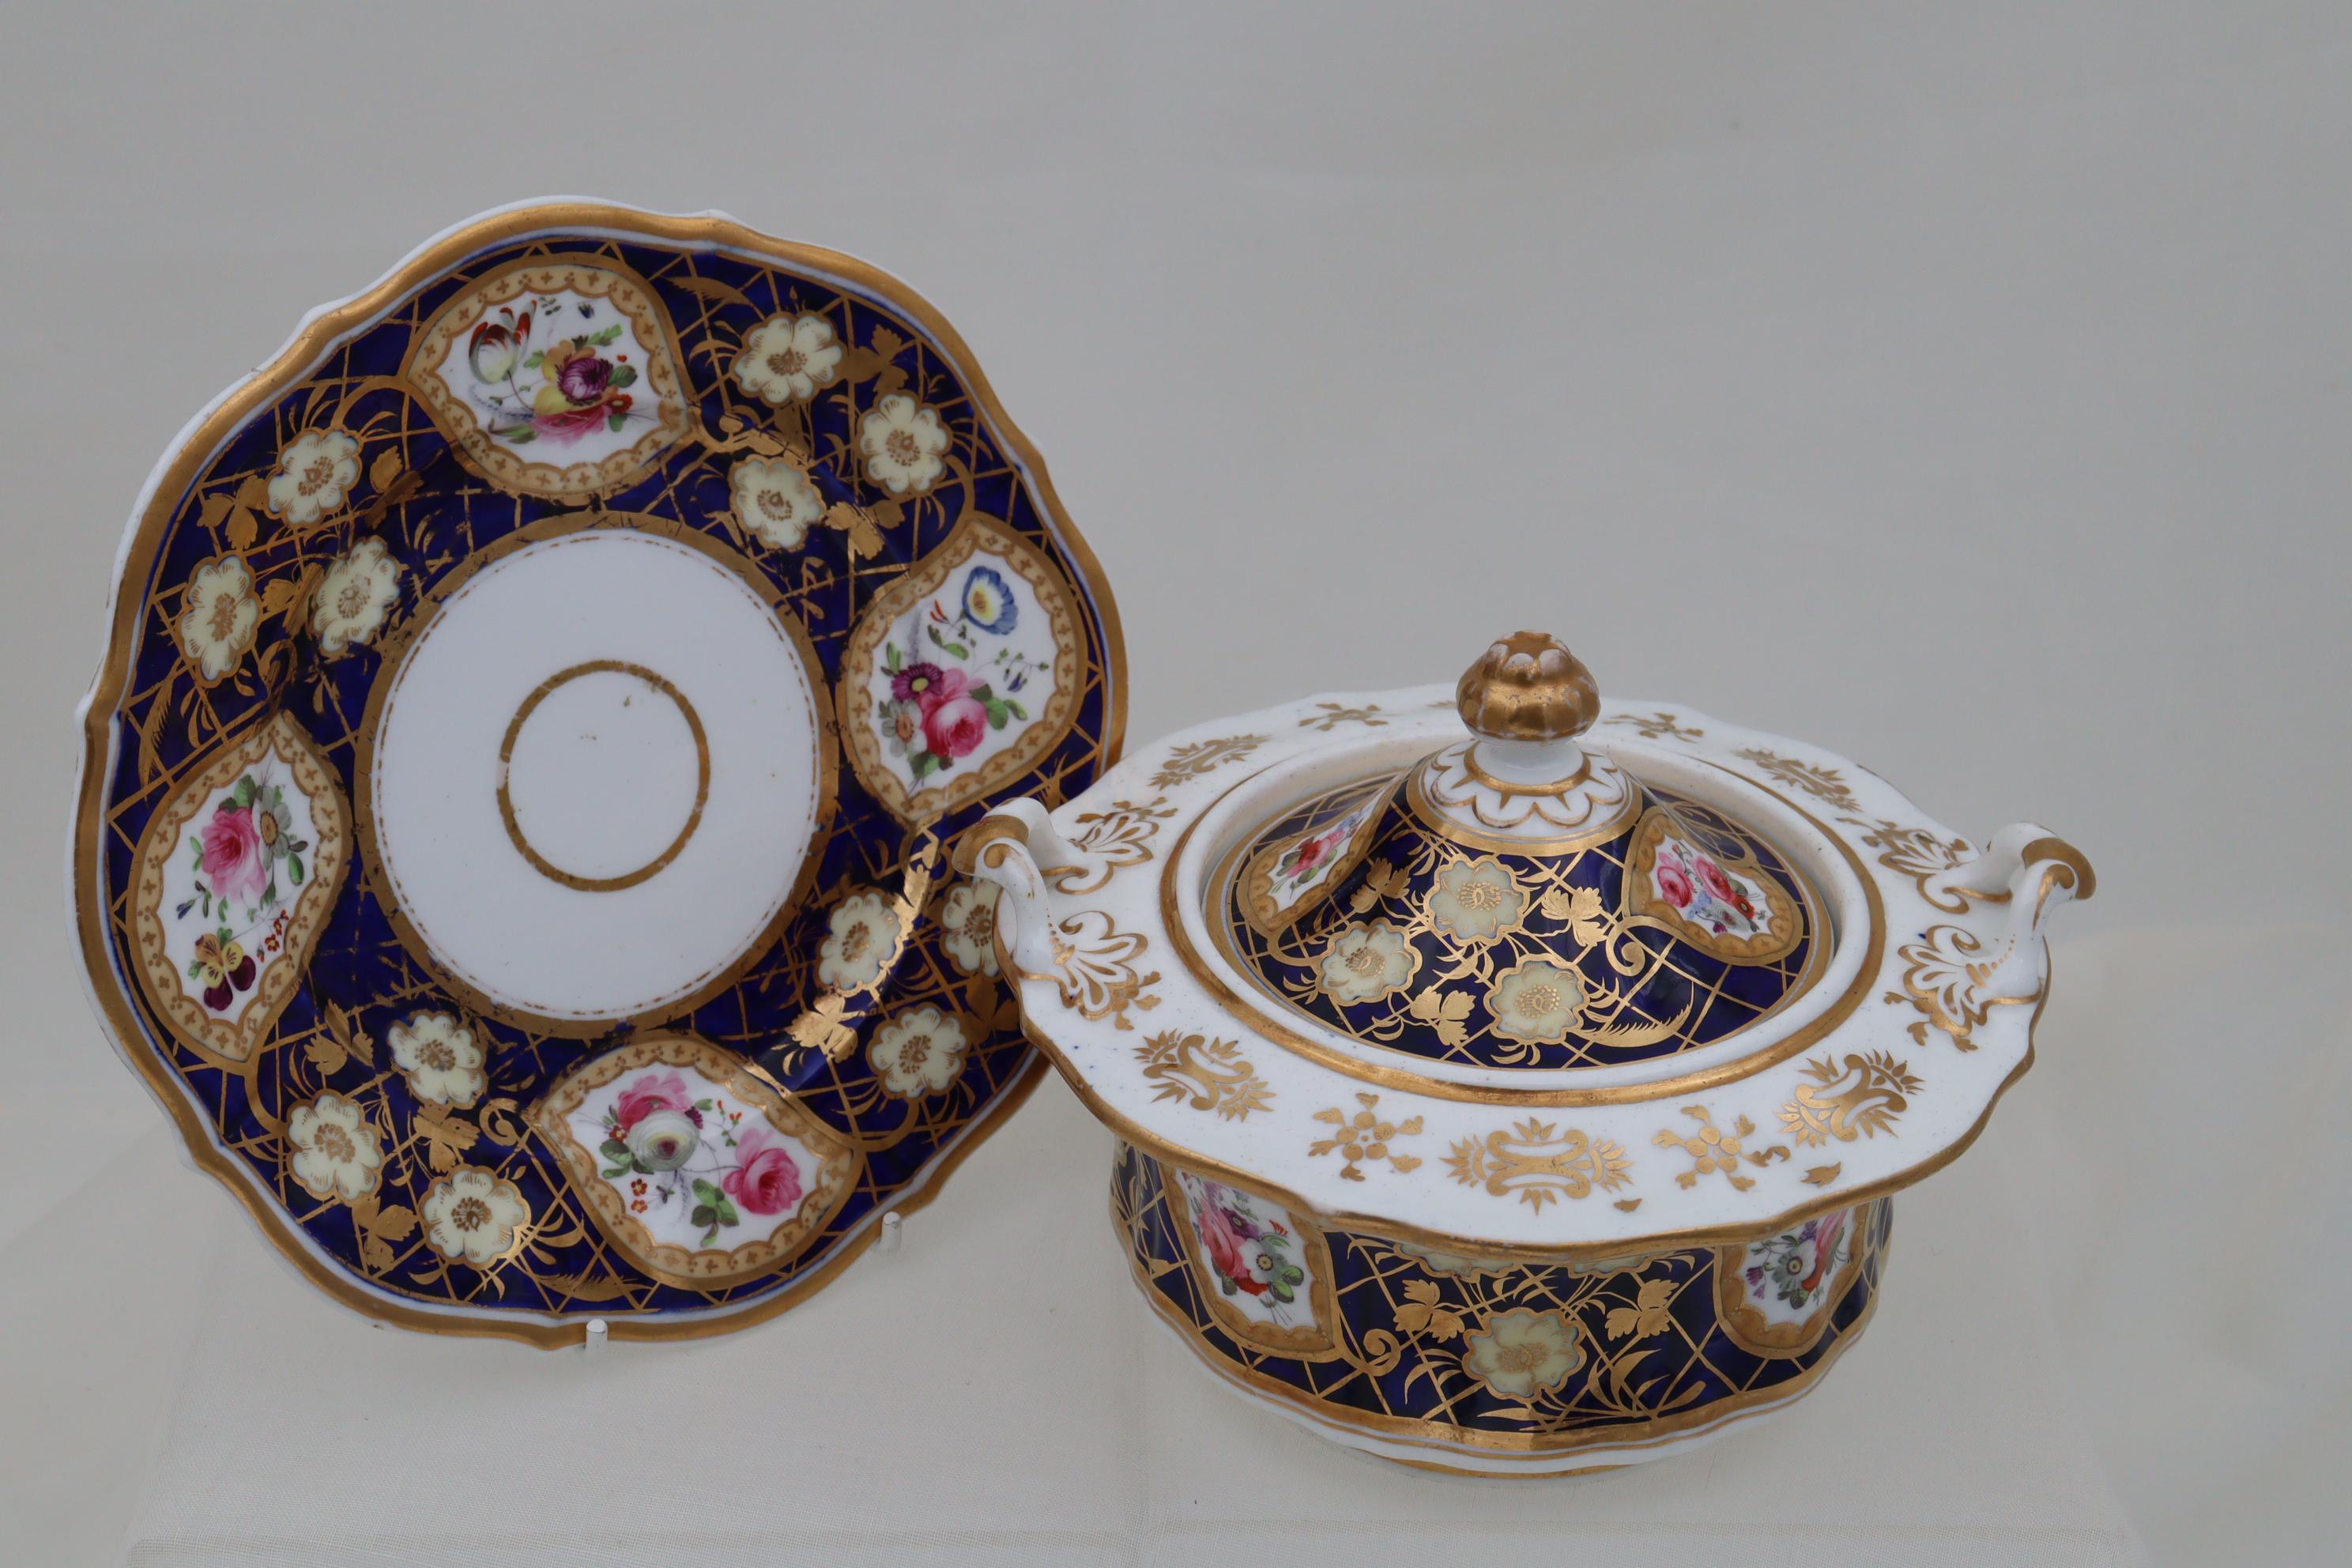 This hand painted and gilded porcelain sucrier on stand is by John and William Ridgway. Each of the almost Paisley shaped gilt edged cartouches on the lid, the side and the stand contain sprays of various flowers, and these cartouches are surrounded